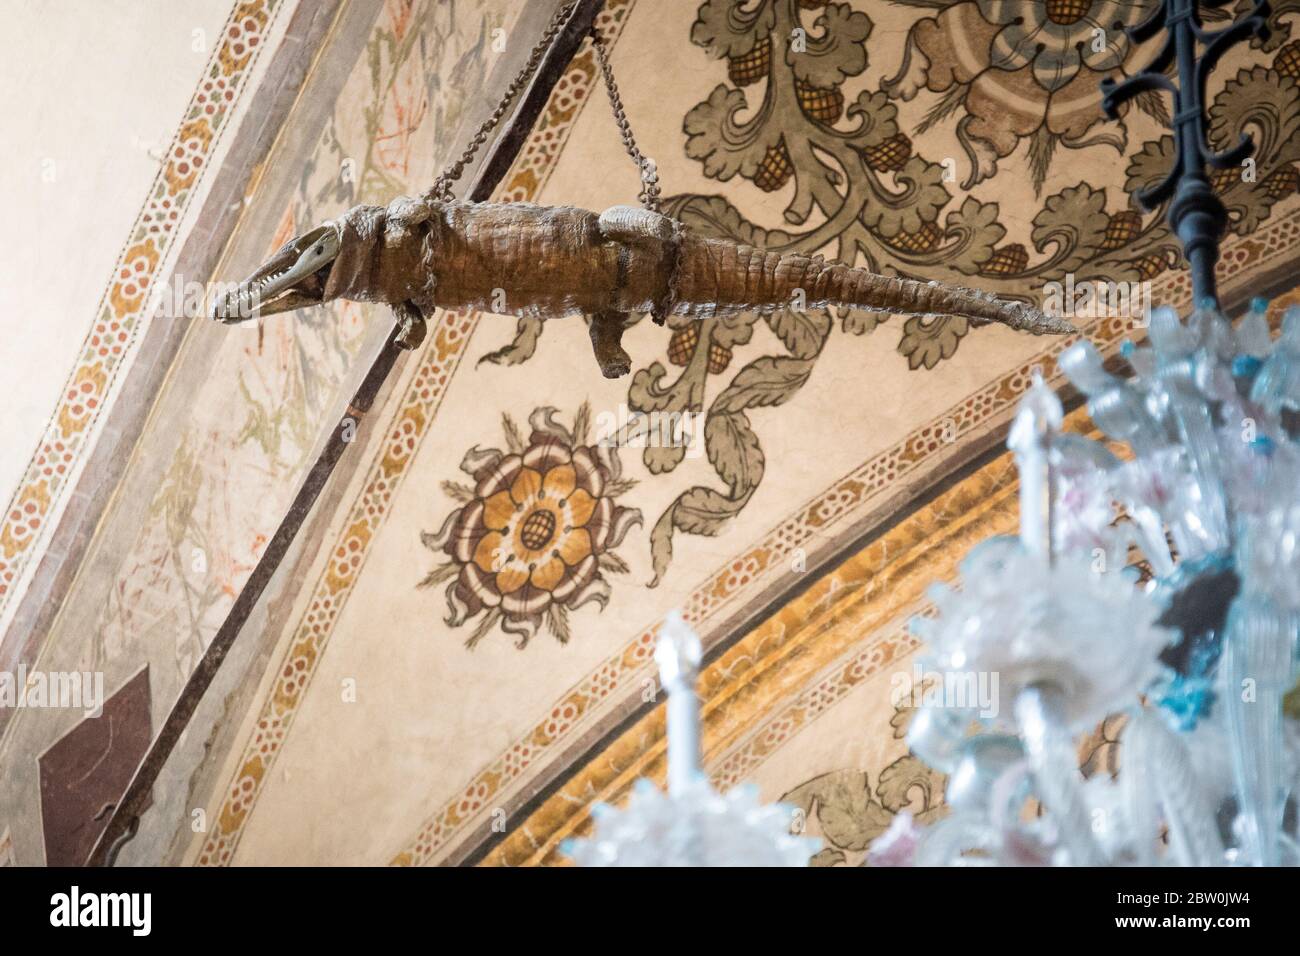 The crocodile hanging from the ceiling in the Sanctuary of Santa Maria delle Grazie, Curtatone, Province of Mantua, Italy. Chandelier in the foregroun Stock Photo